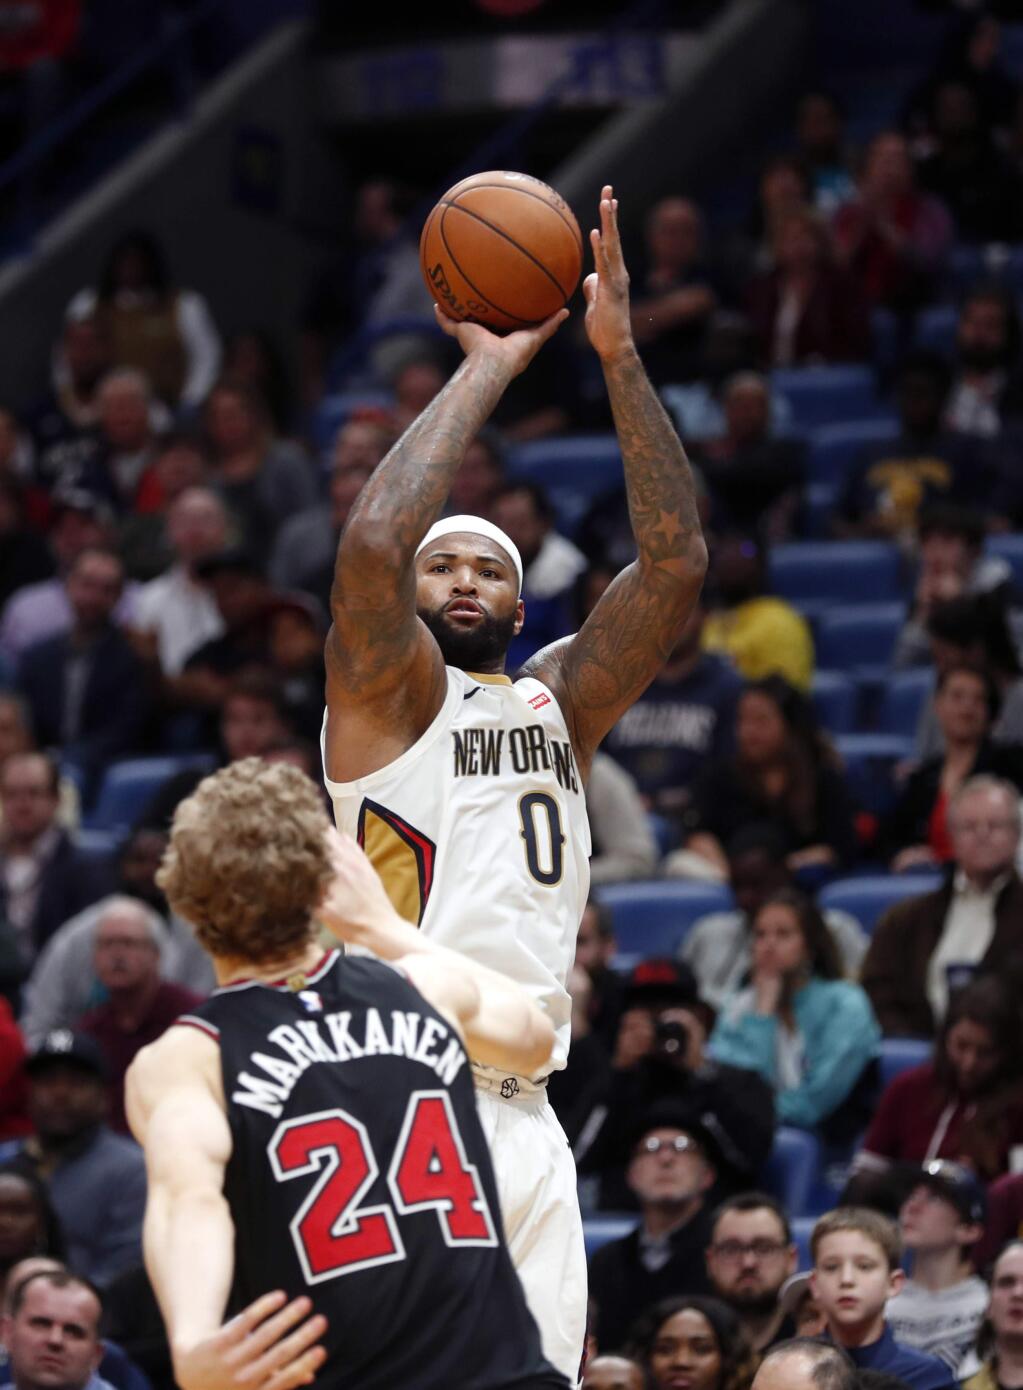 New Orleans Pelicans center DeMarcus Cousins shoots over Chicago Bulls forward Lauri Markkanen in the second half in New Orleans, Monday, Jan. 22, 2018. The Pelicans won in double overtime, 132-128. (AP Photo/Gerald Herbert)